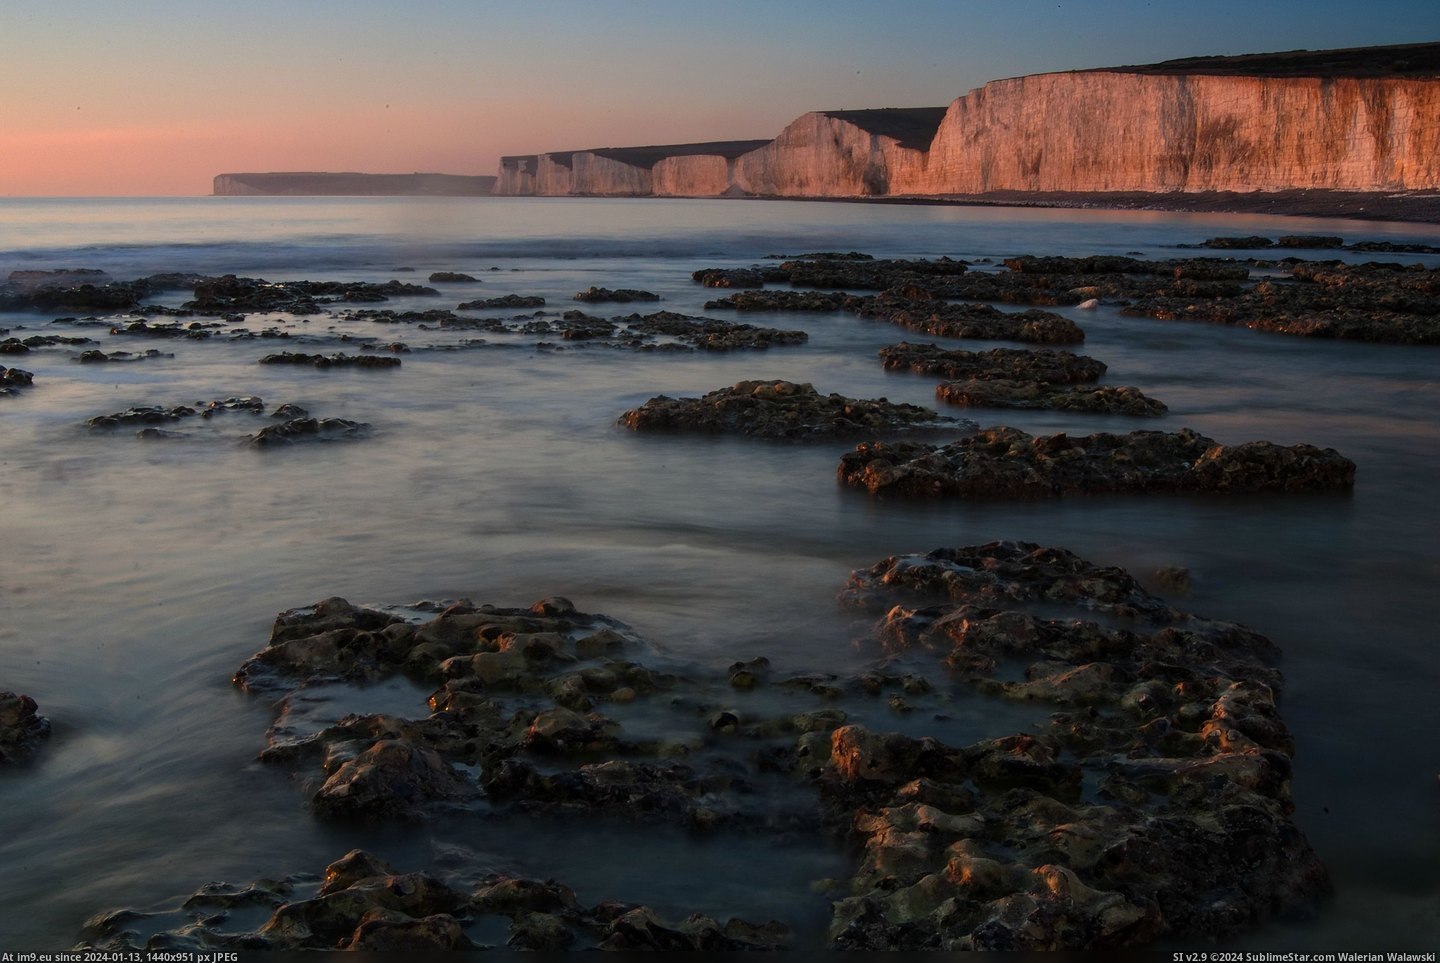 #Head #South #Gap #Located #East #England [Earthporn] Birling Gap, located in the South East of England, near Beachy Head [2854x1896] Pic. (Image of album My r/EARTHPORN favs))